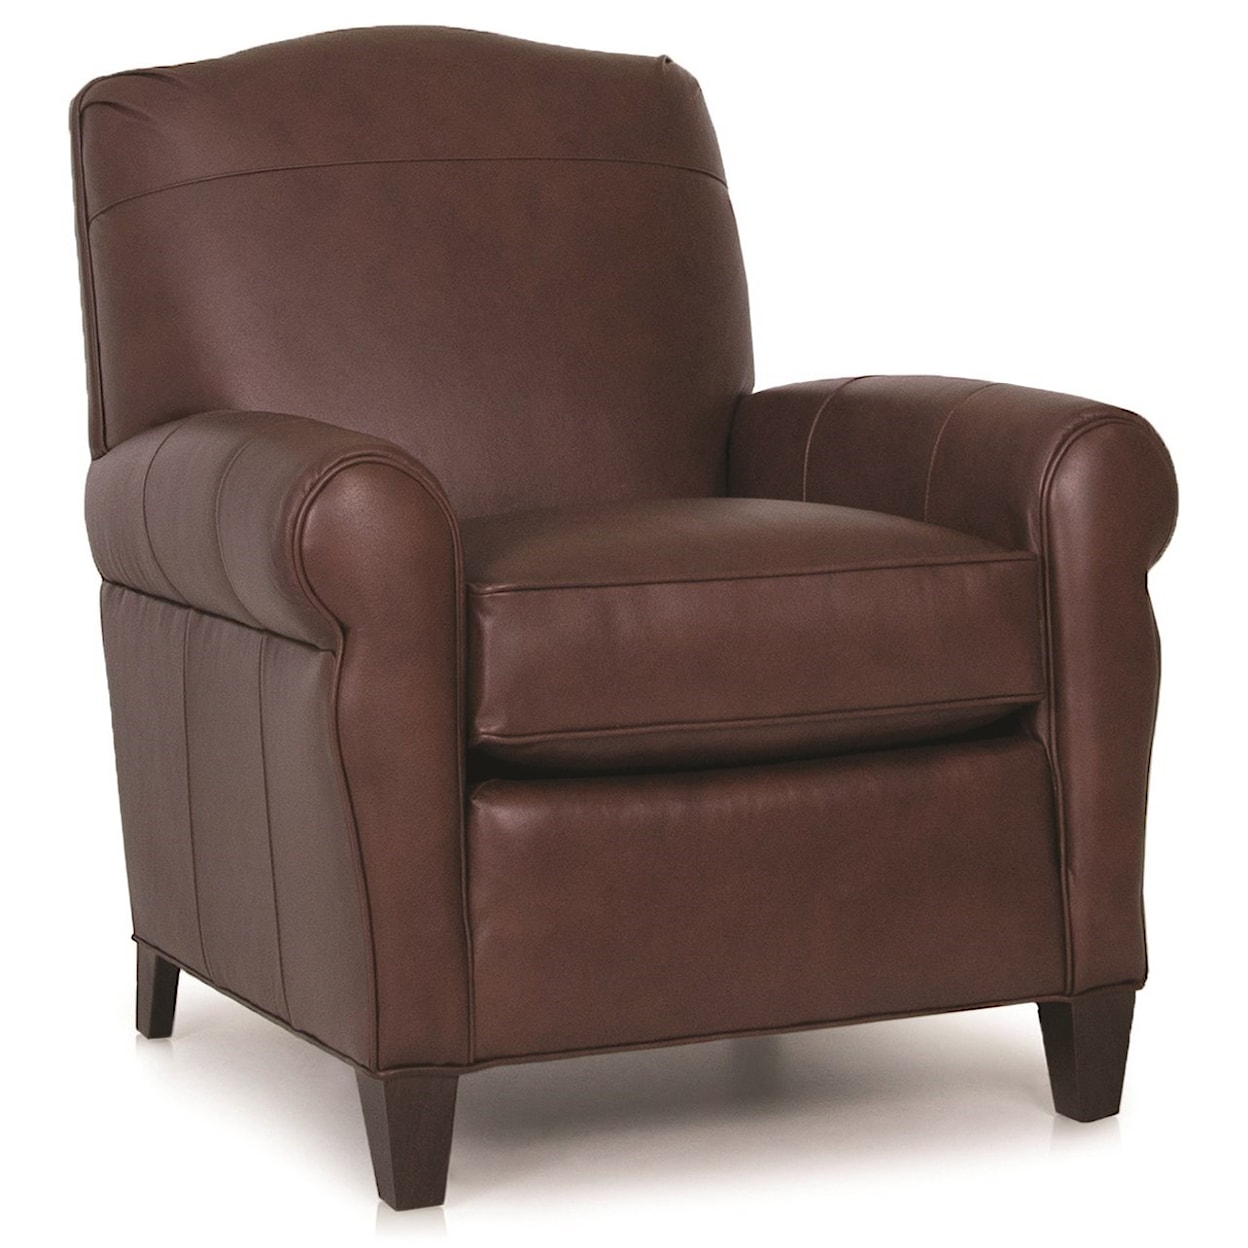 Smith Brothers 933 Upholstered Chair